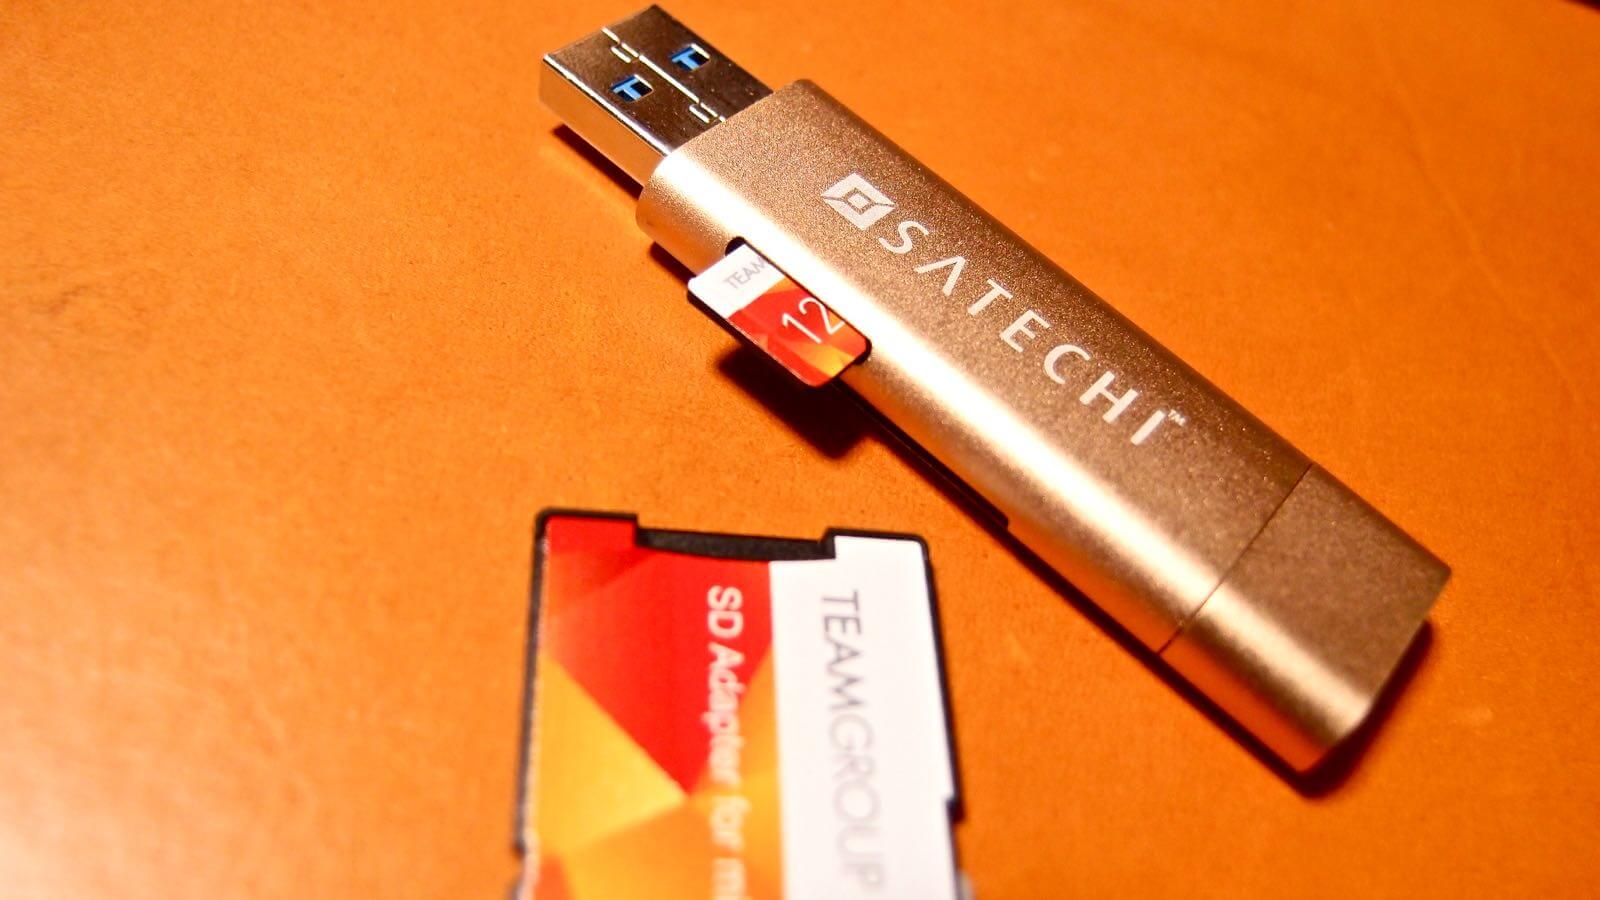 0164 10 SATECHI Type C plus USB3 0 USB Card Reader Review 10